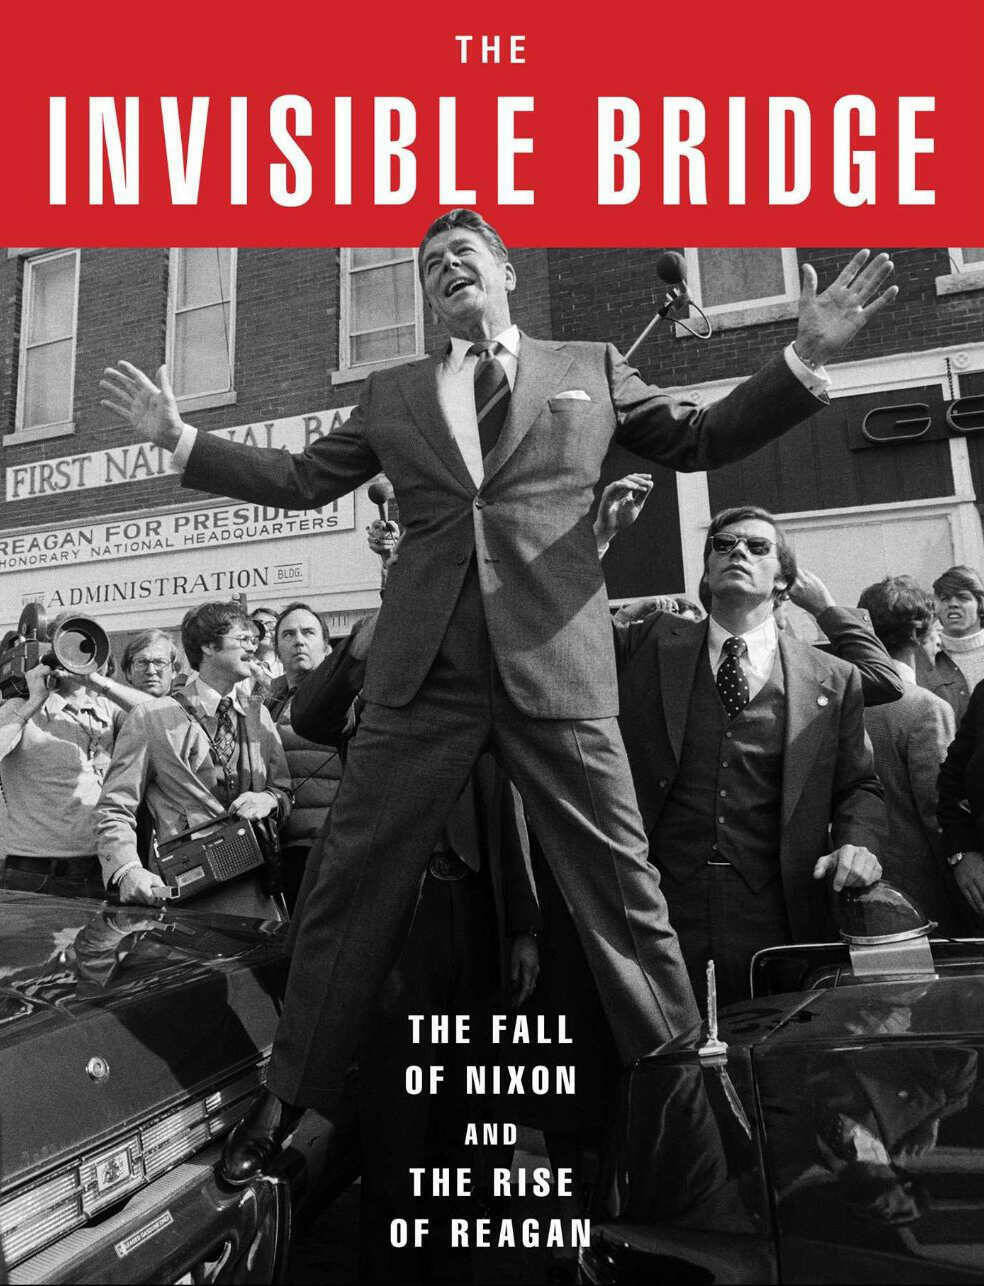 the invisible bridge by rick perlstein